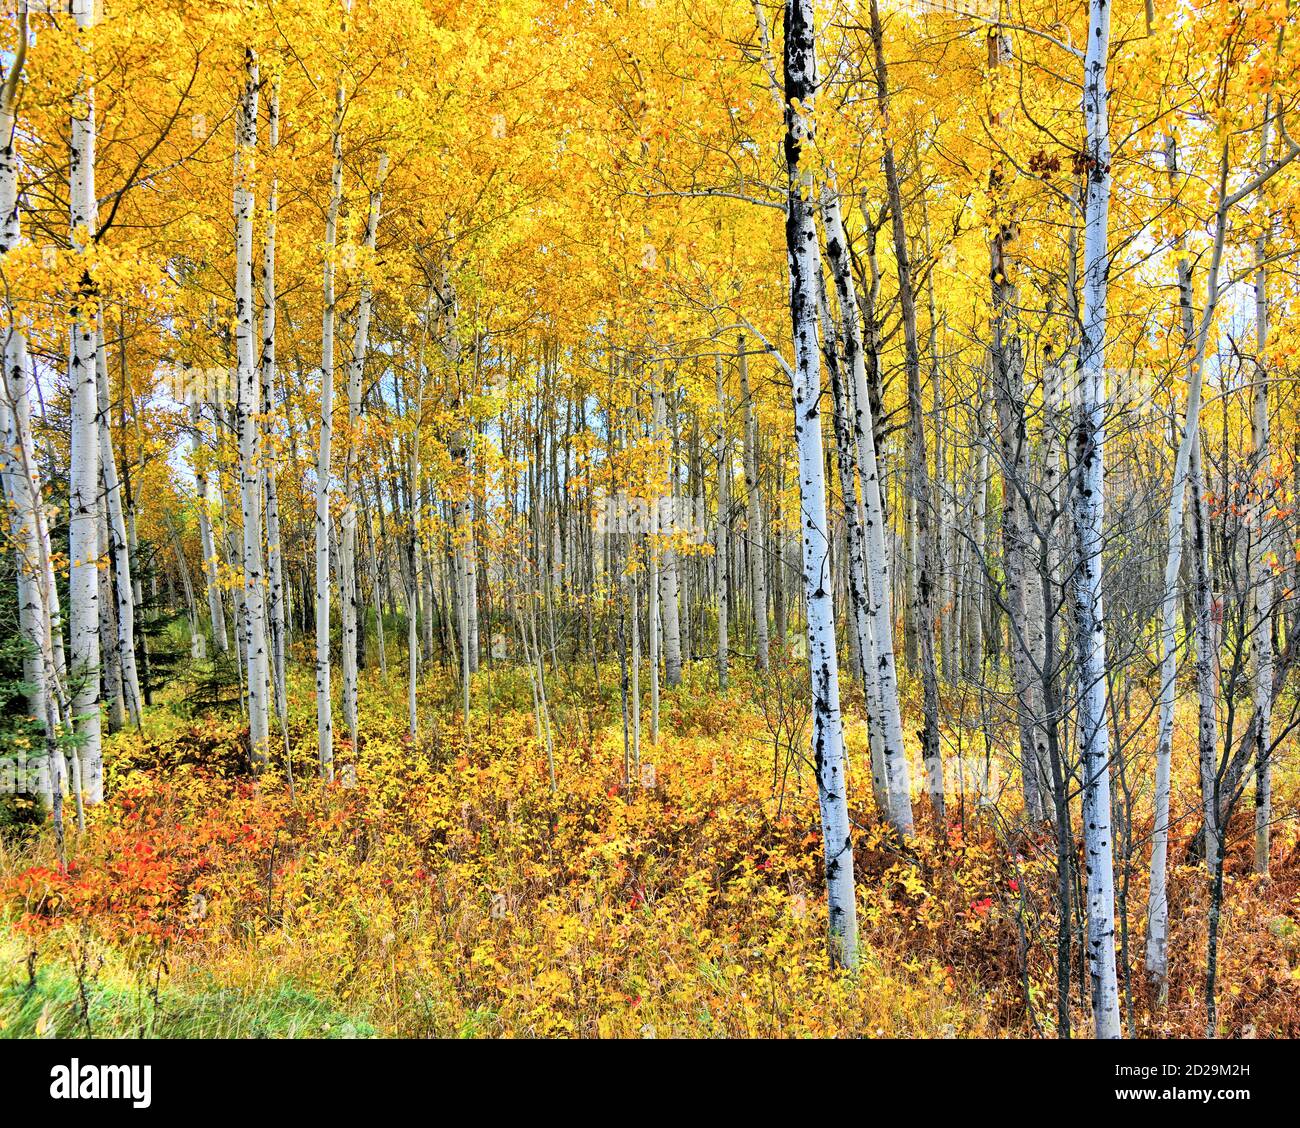 Golden leaves and the white bark of birch trees show the fall beauty of a birch tree forest, in Ontario Canada. Stock Photo